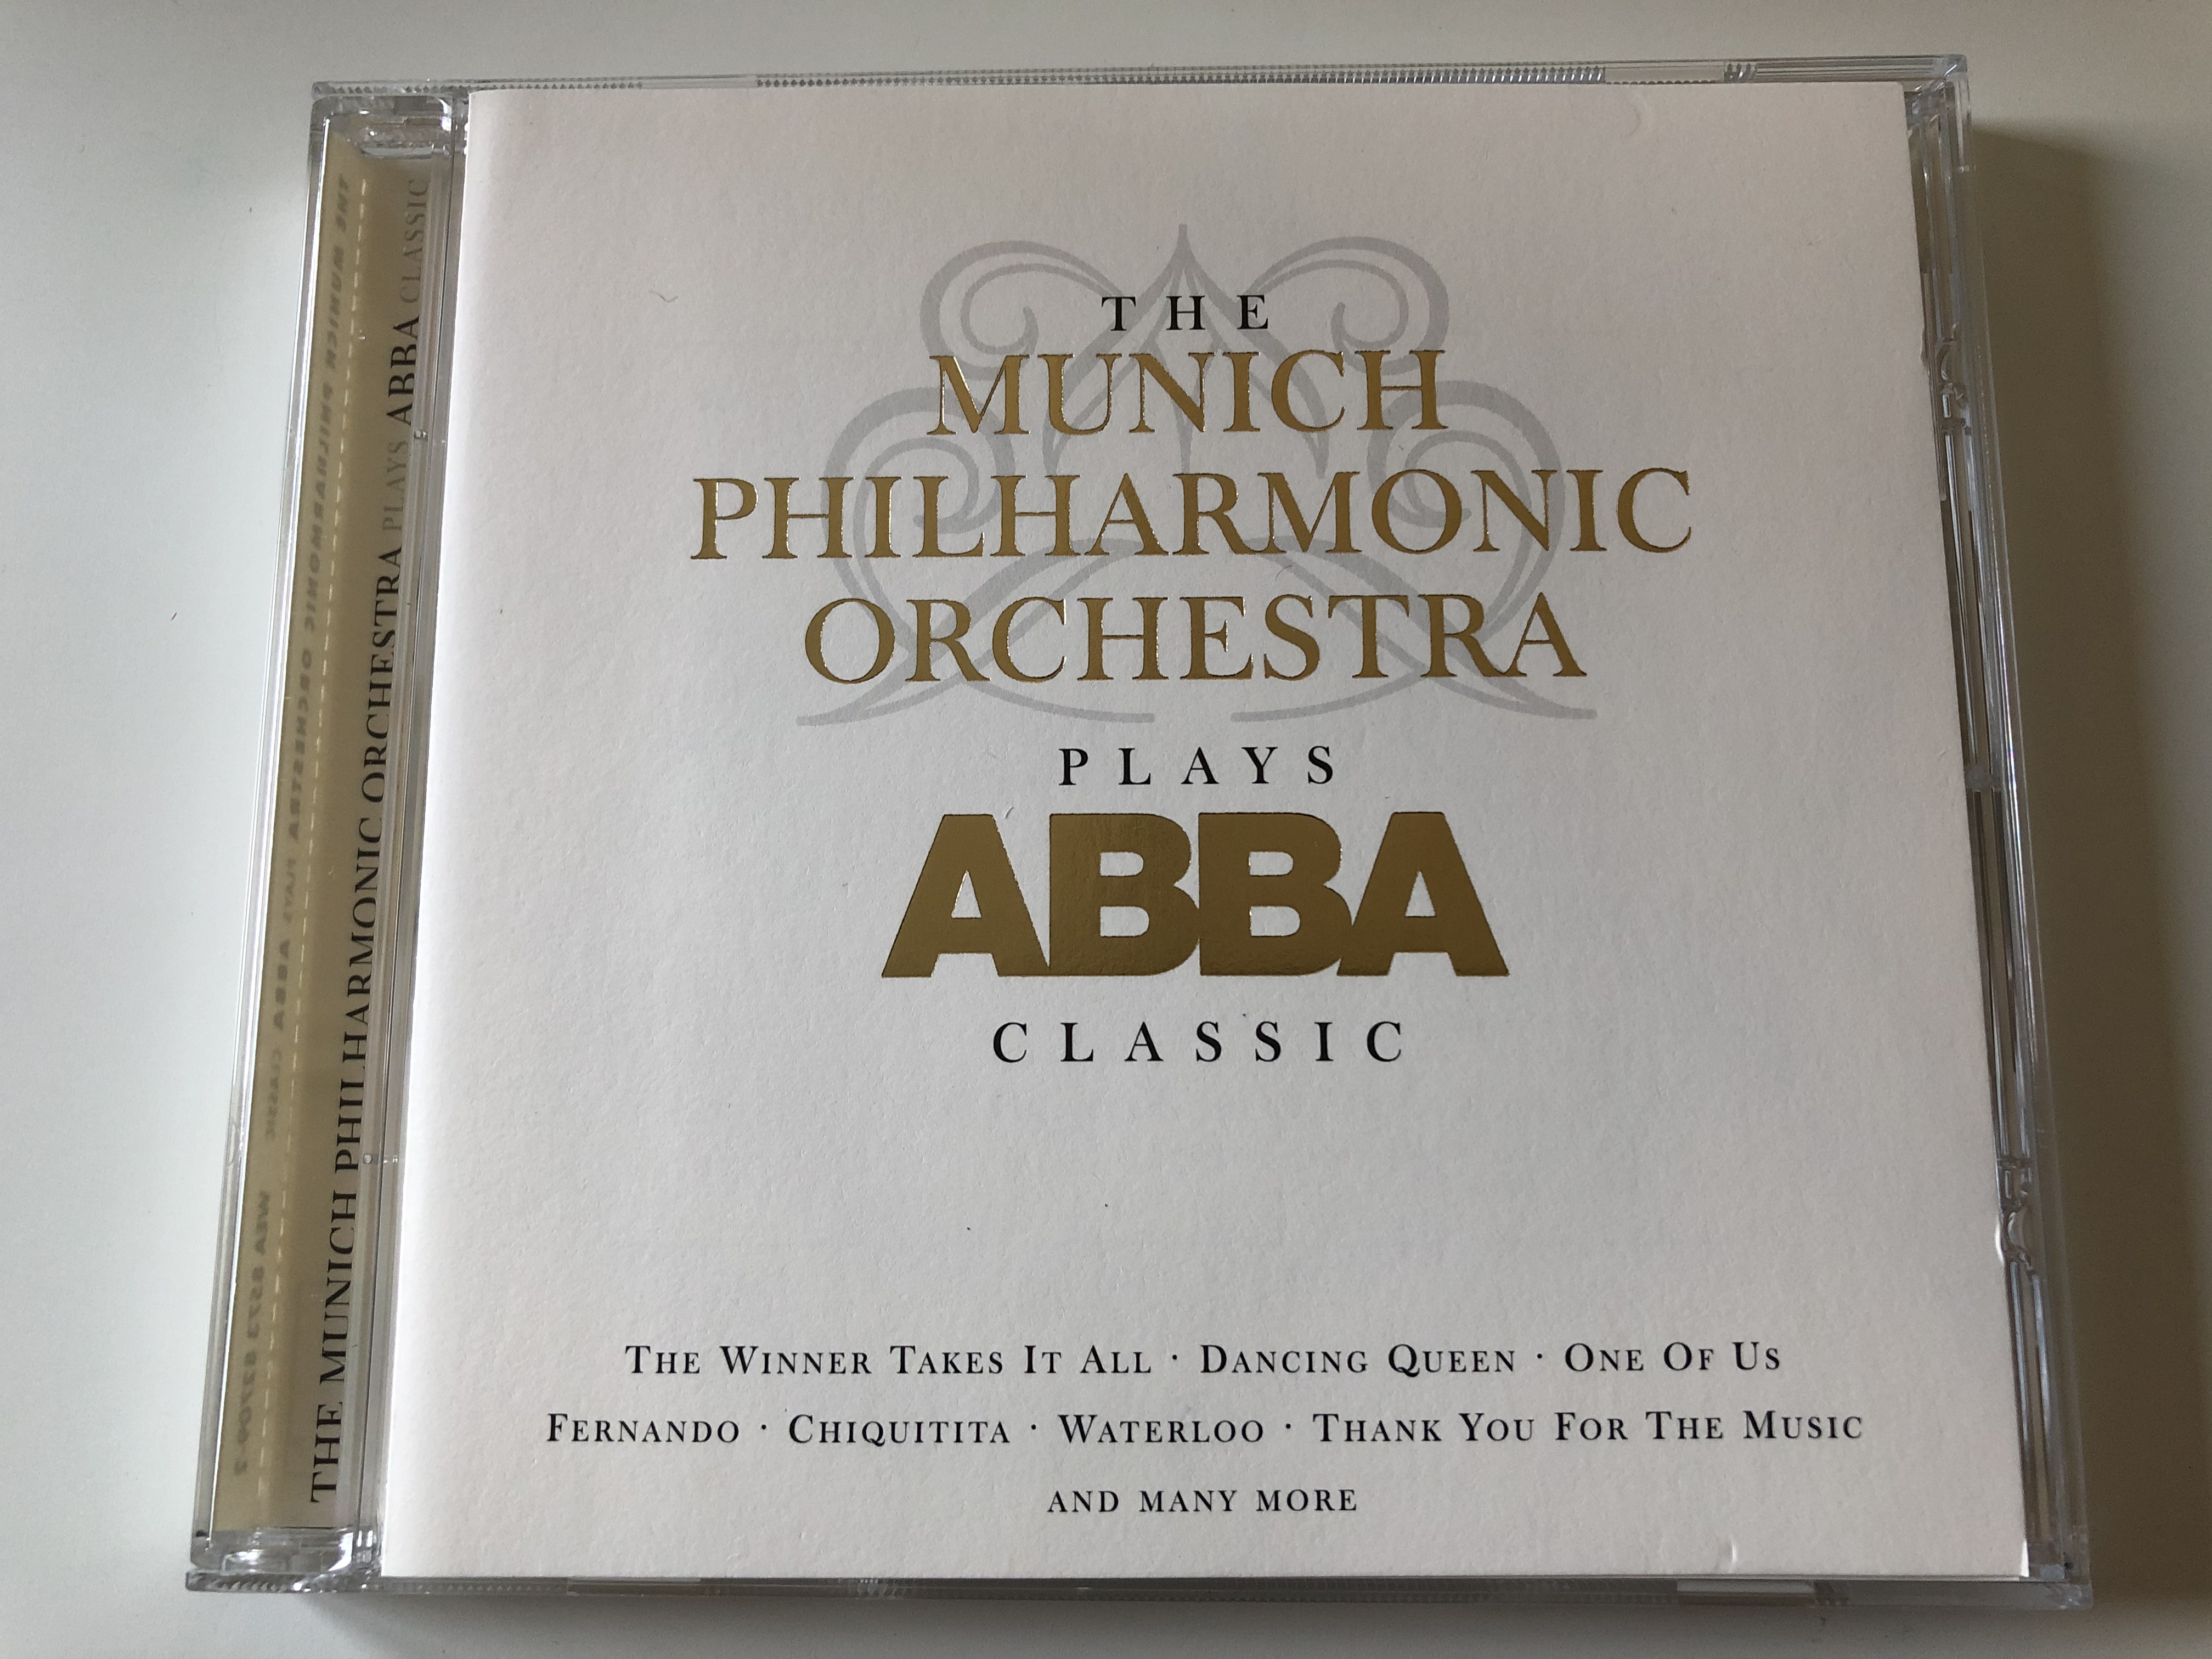 the-munich-philharmonic-orchestra-plays-abba-classic-the-winner-takes-it-all-dancing-queen-one-of-us-fernando-chiquitita-waterloo-thank-you-for-the-music-and-many-more-wea-audio-cd-1-.jpg